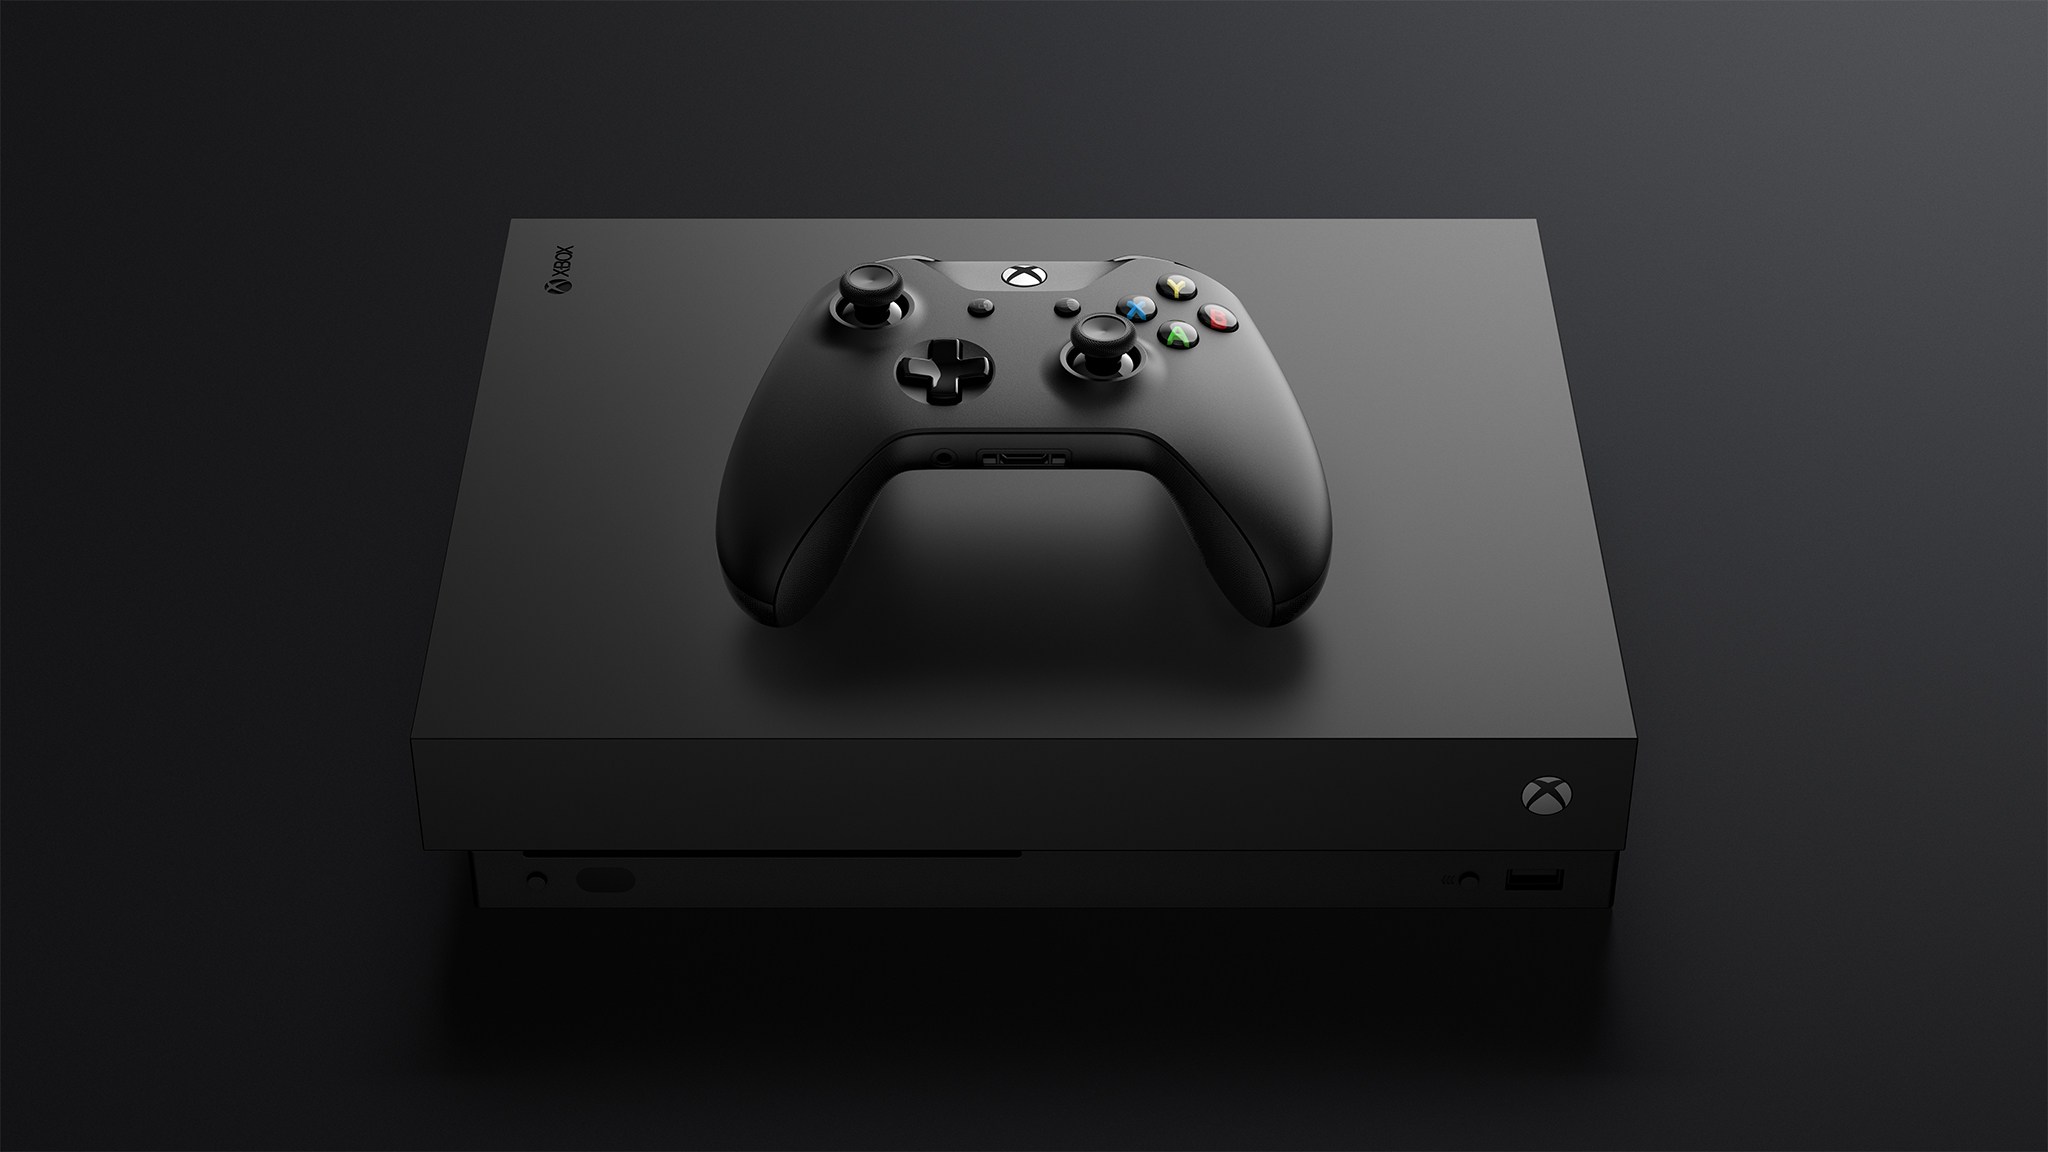 dolby vision xbox one s